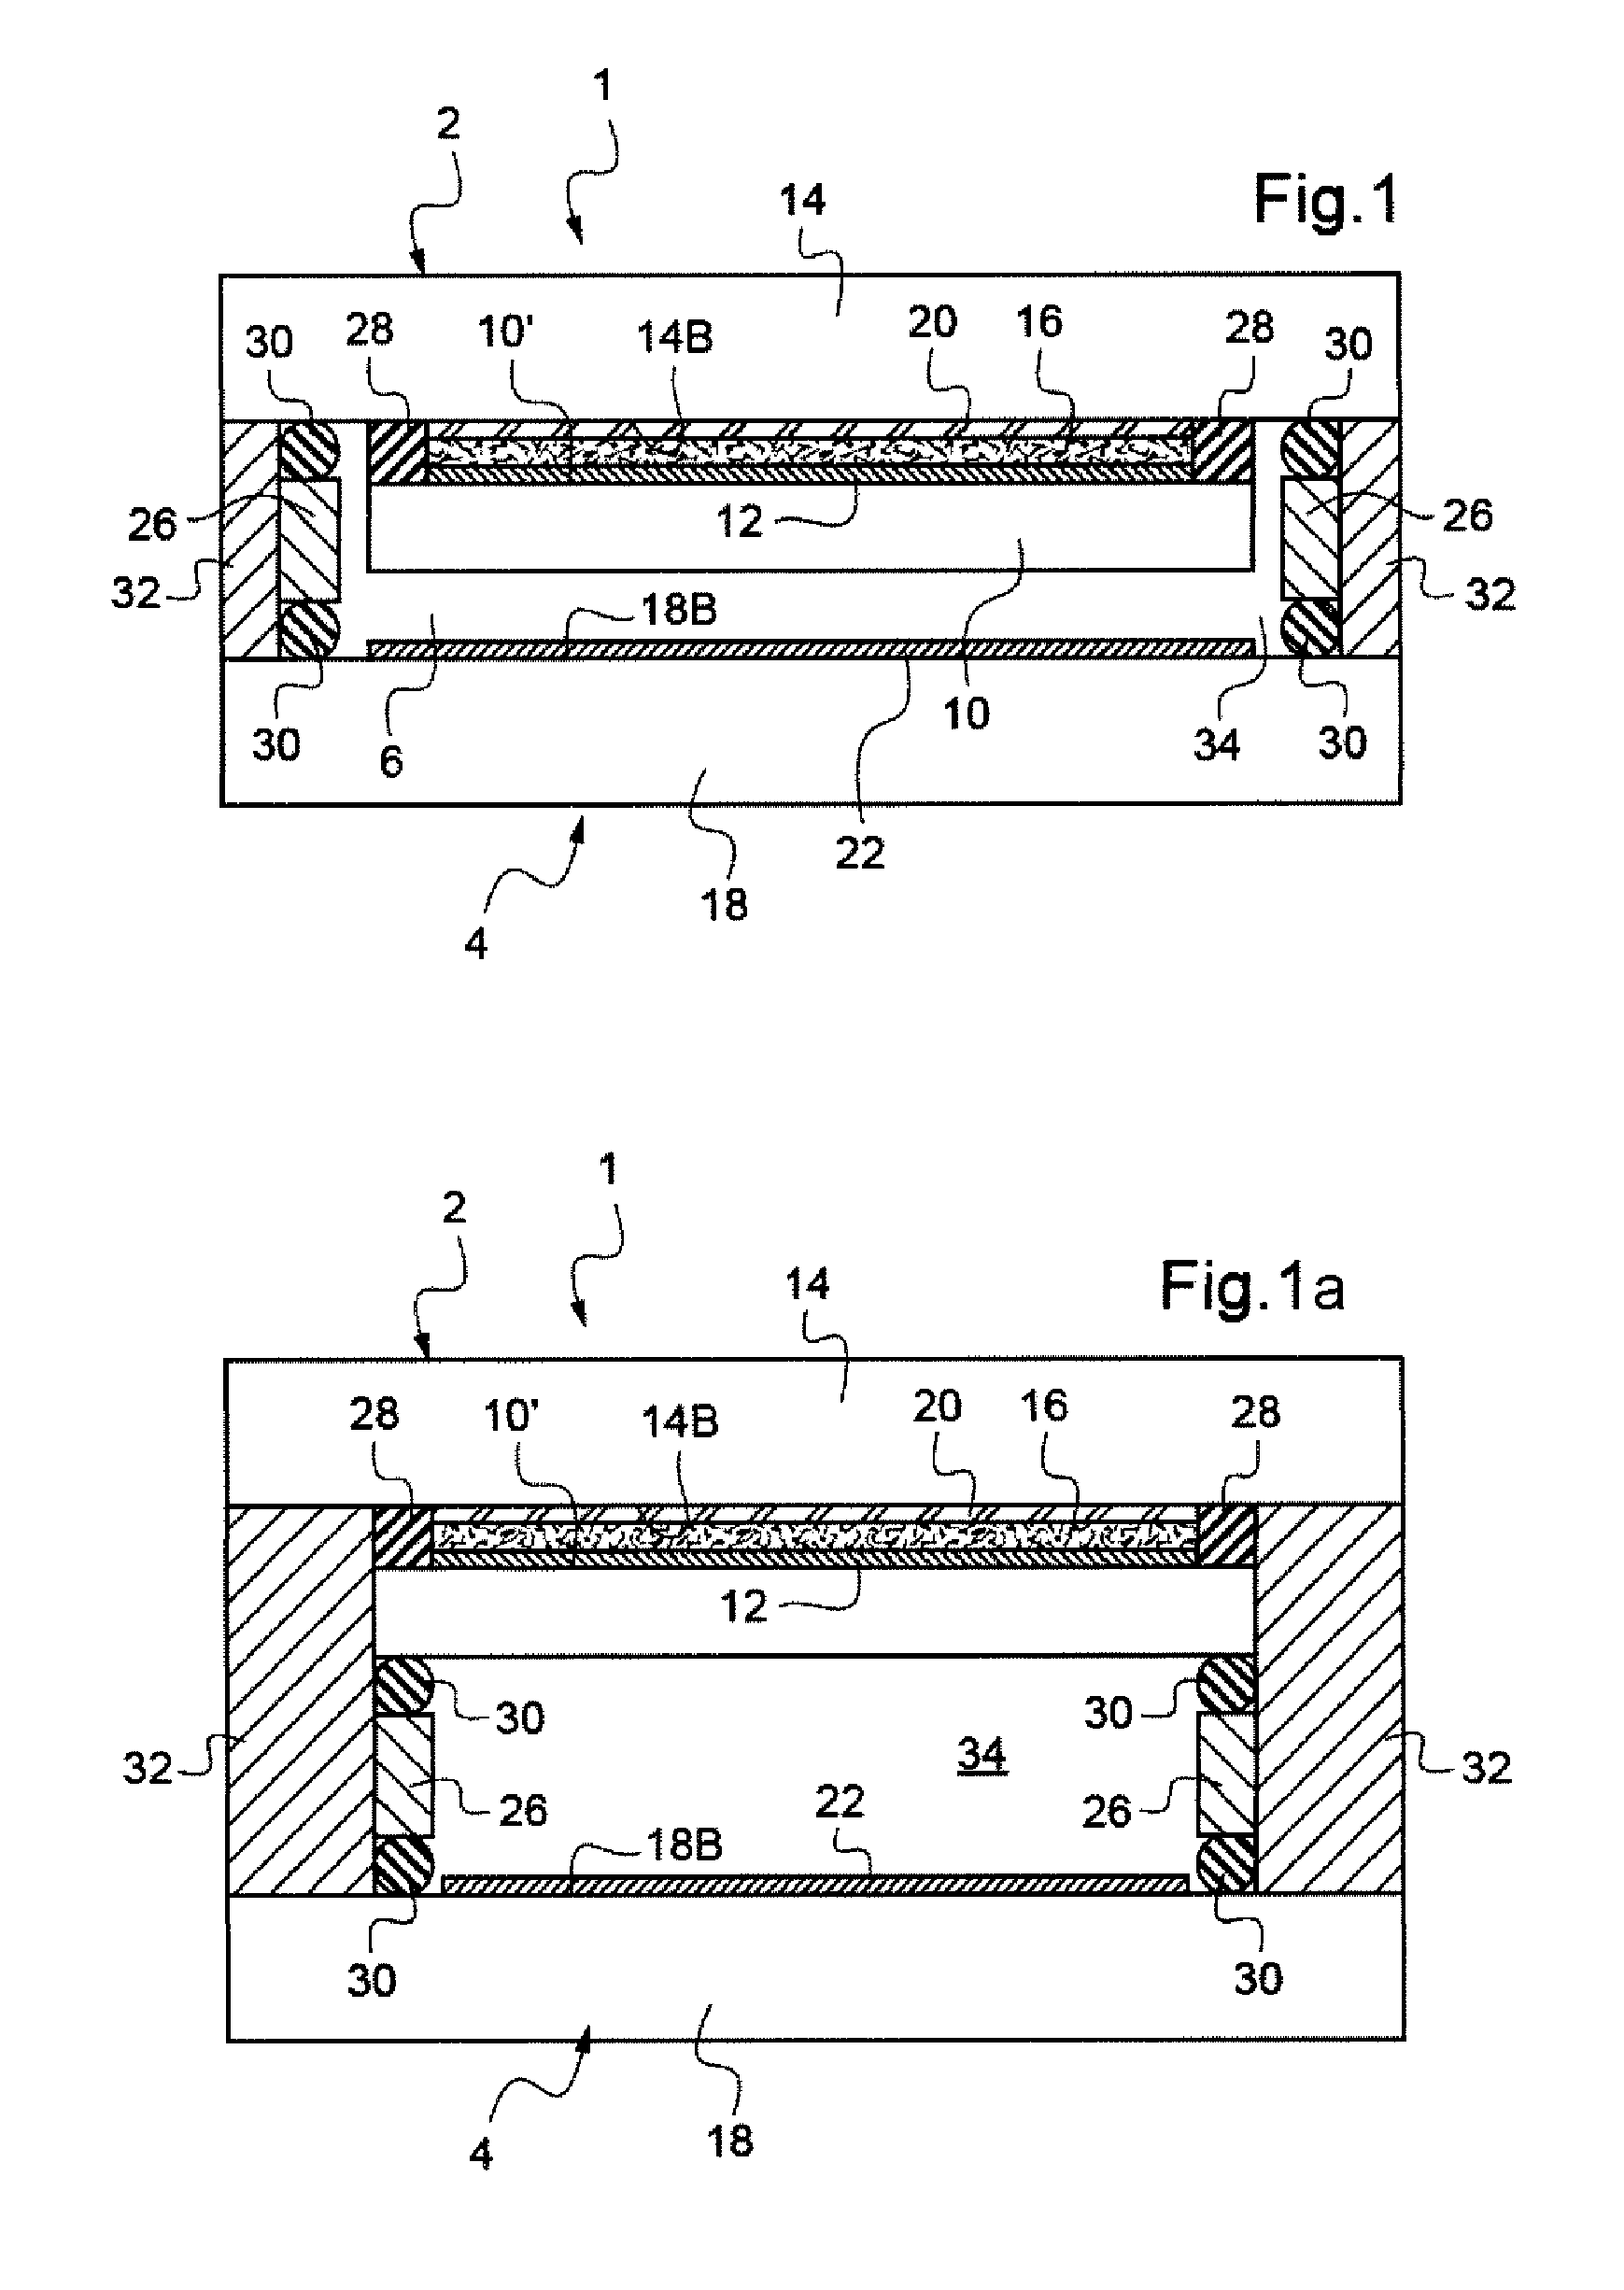 Electrochemical glazing having electrically controllable optical and energy-related properties